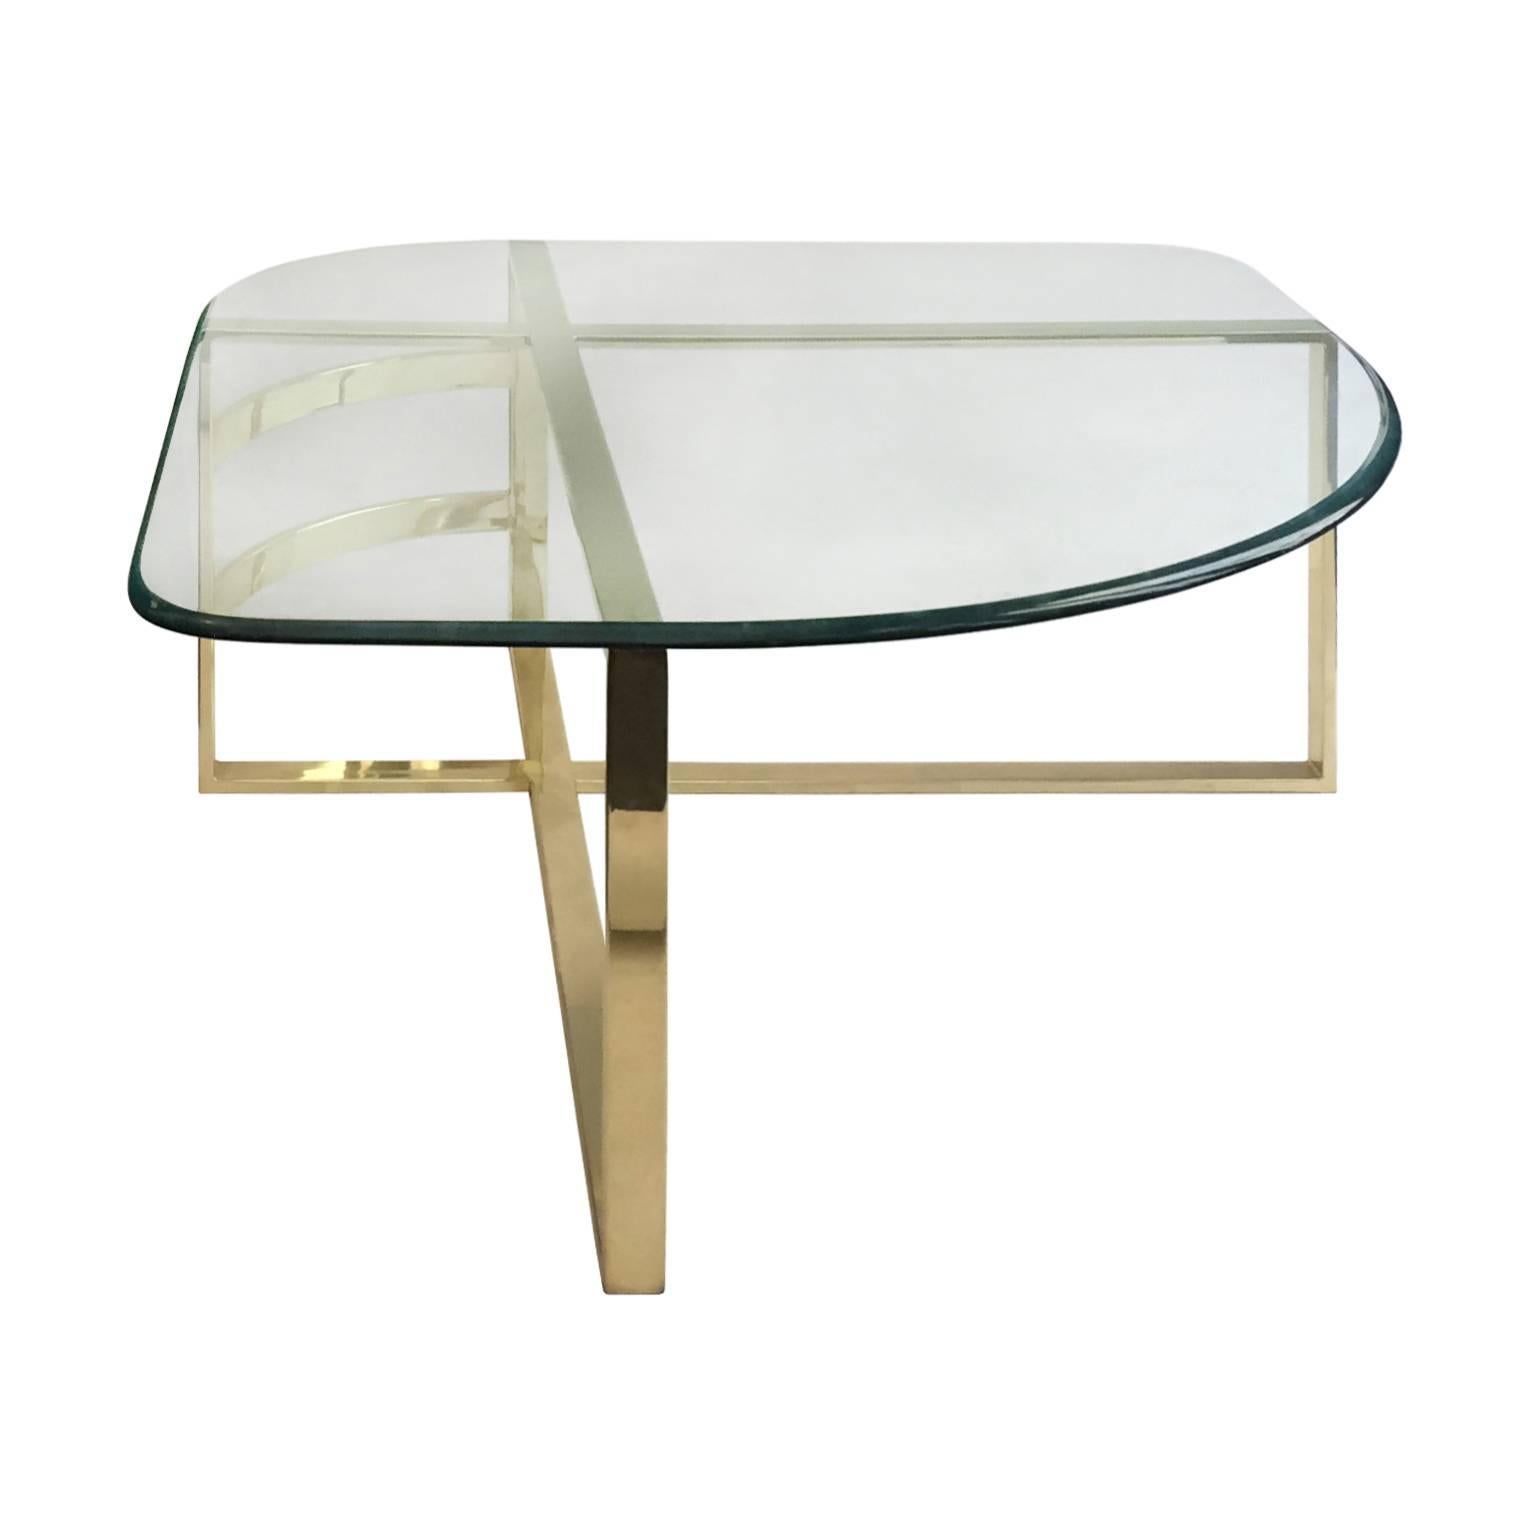 1970s Brass Coffee Table with Rounded Triangular Glass Top For Sale